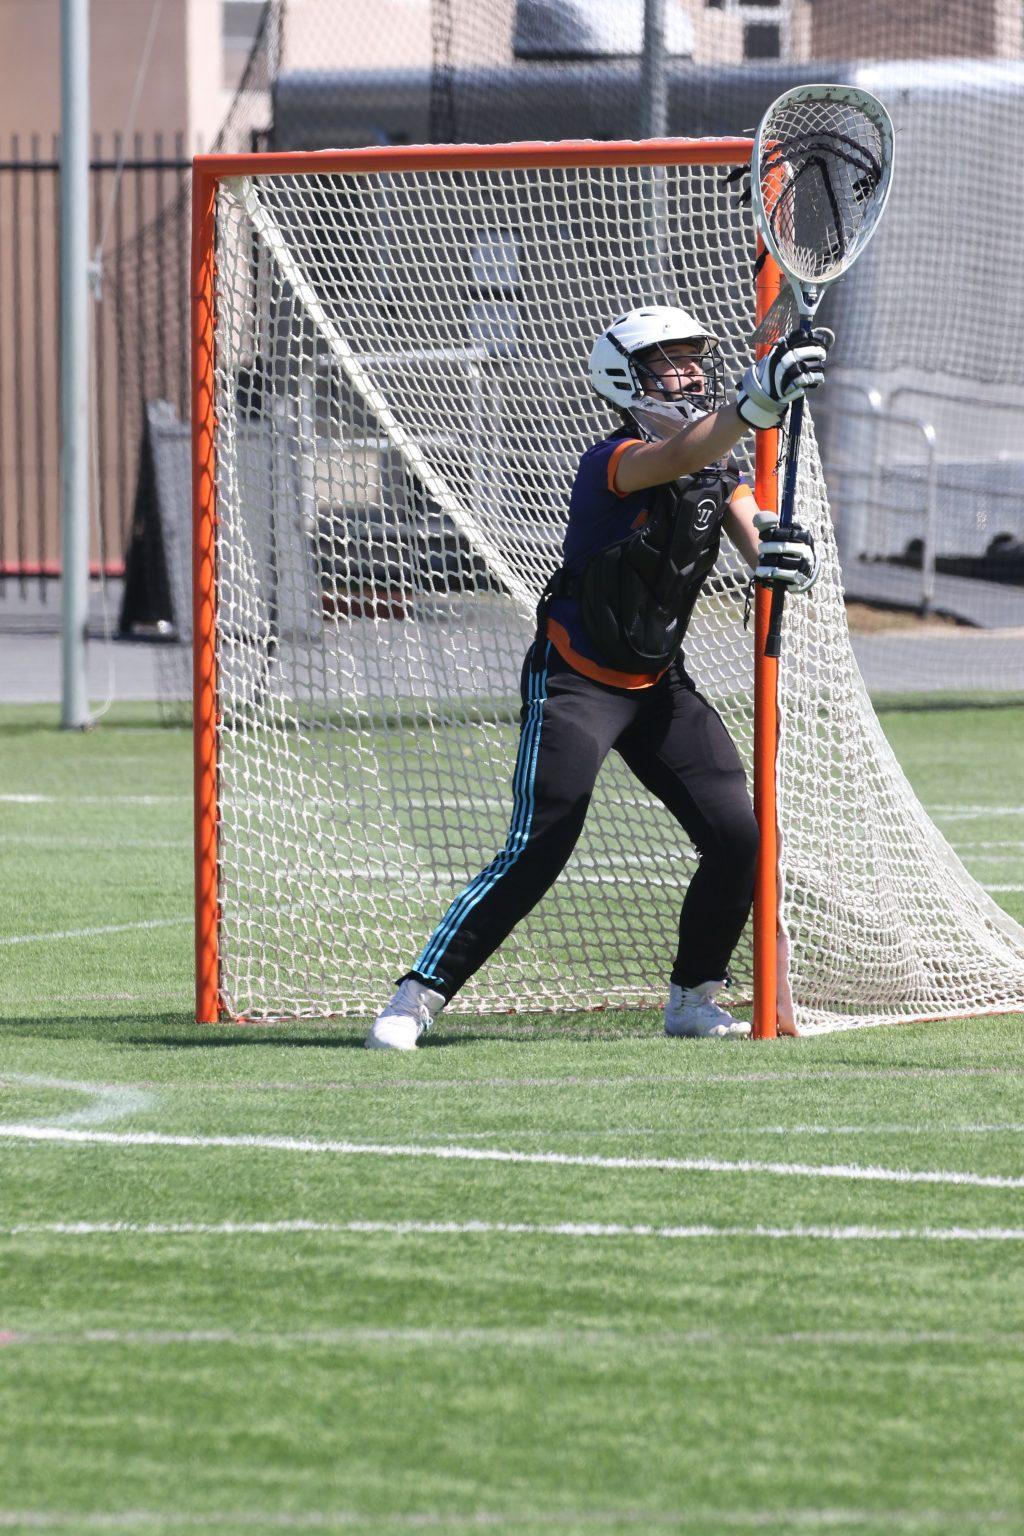 Freshman goalkeeper Kamryn Kamps makes a save during a match against Concordia in Irvine on March 27. Kamps had a career high 13 saves in the match, which the Waves won 13-8. Photo Courtesy of Pepperdine Parent